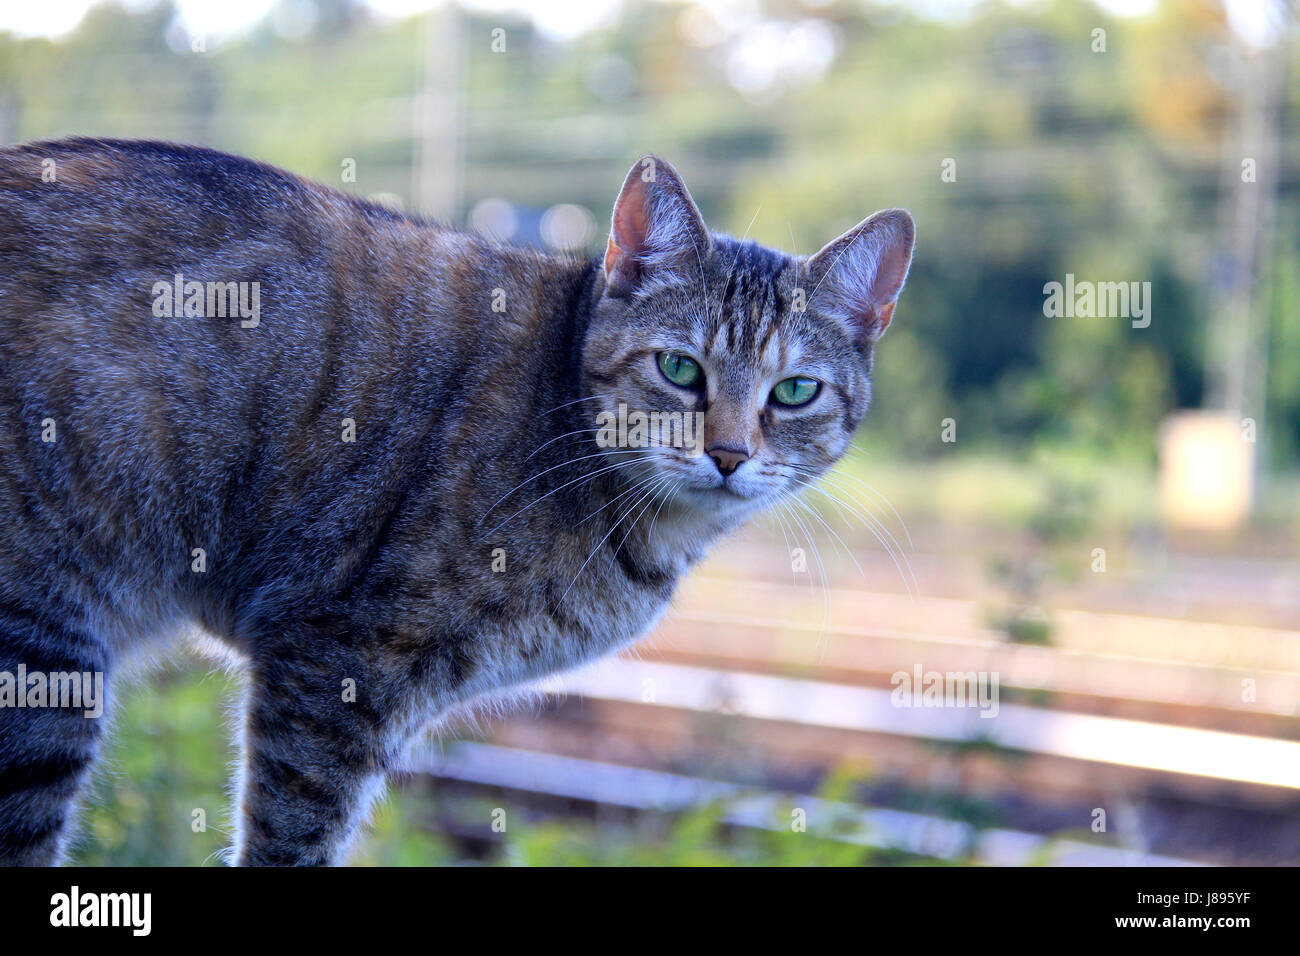 balance, pole, fence, fence in, fencing, wire netting, post, pussycat, cat, Stock Photo